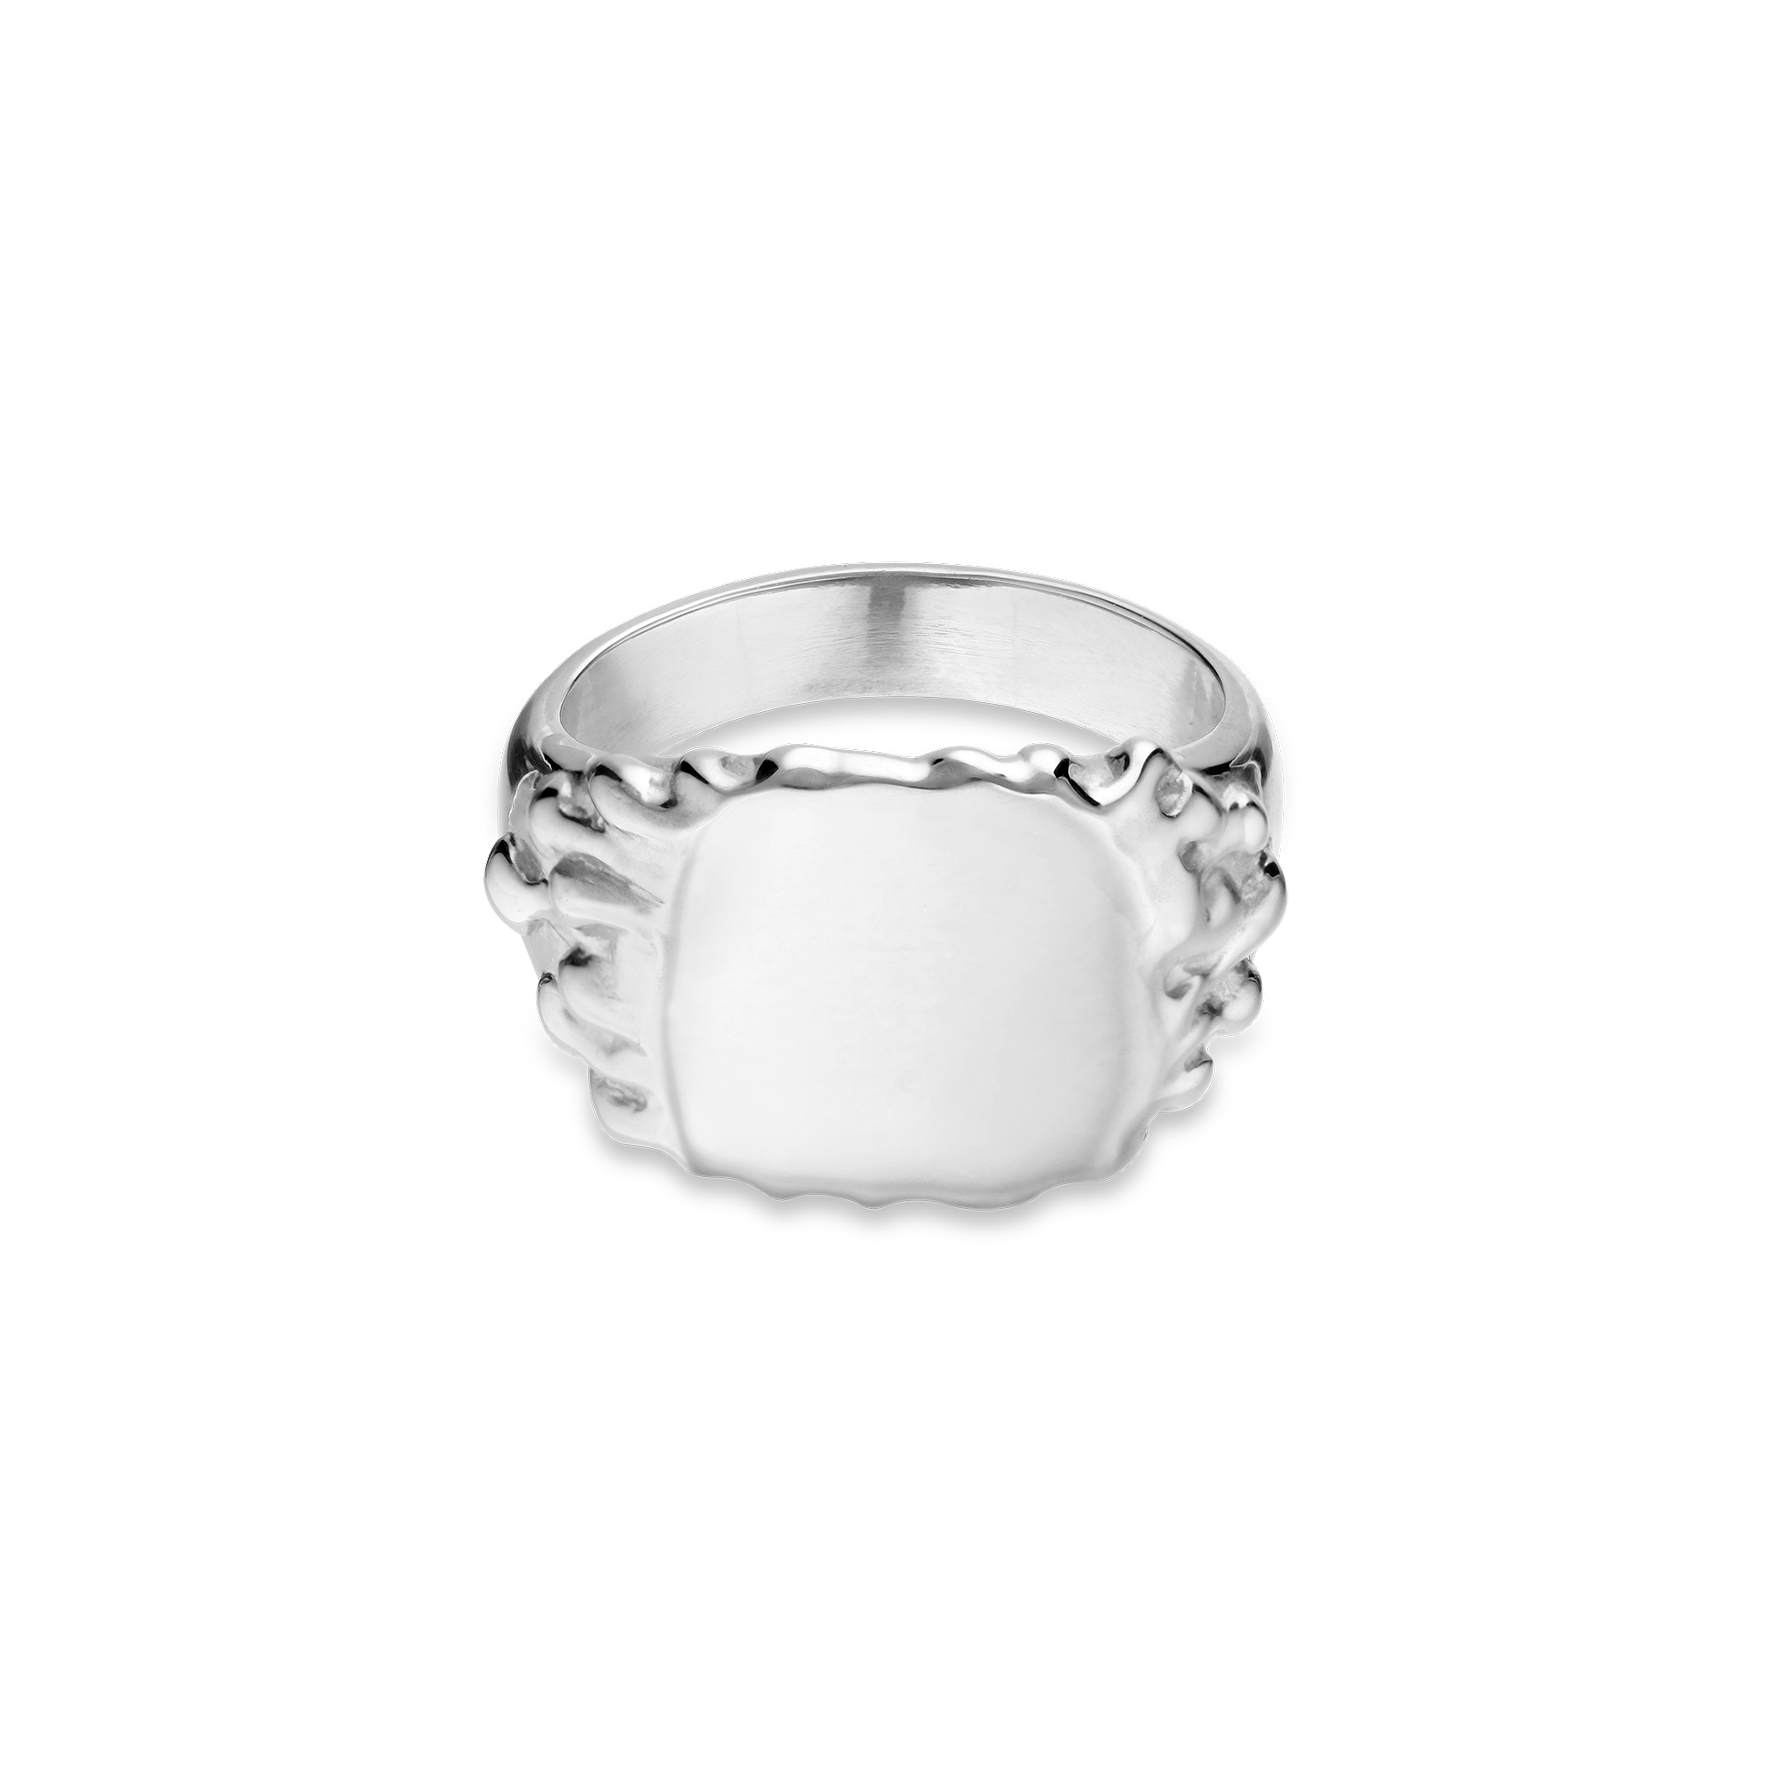 Drippy Signet Ring from Jane Kønig in Silver Sterling 925